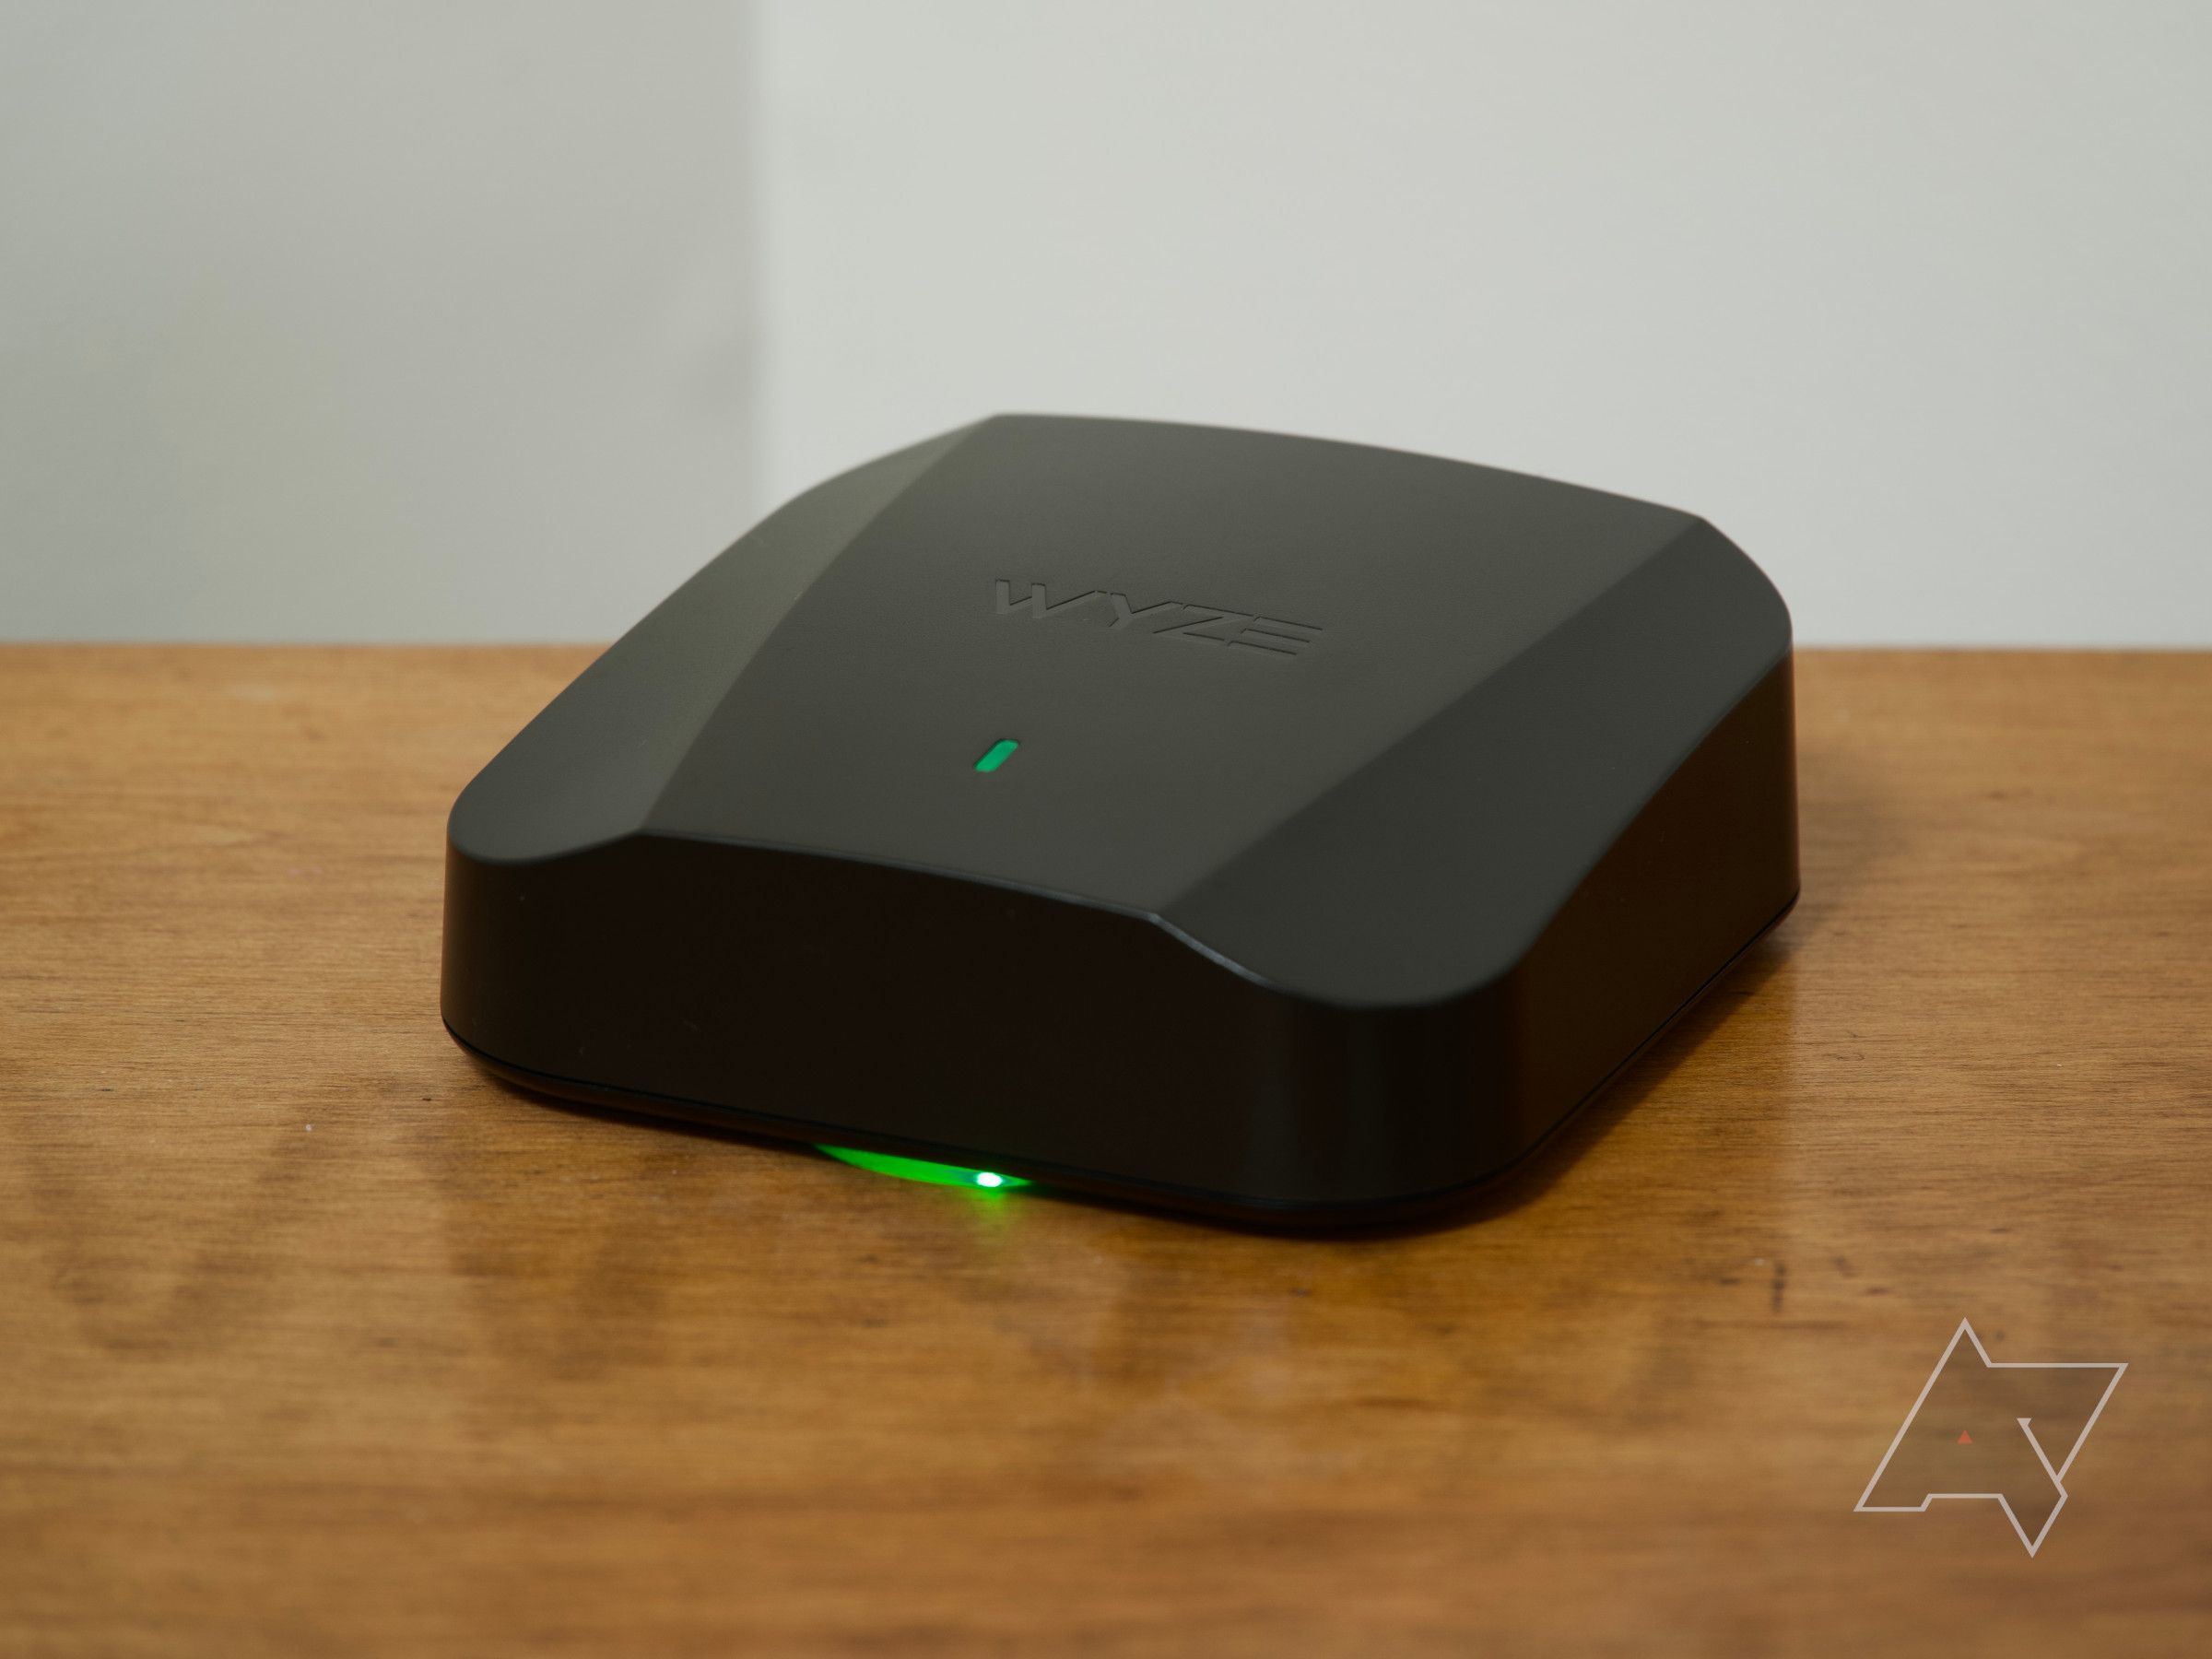 Wyze Mesh Router Pro connected status light